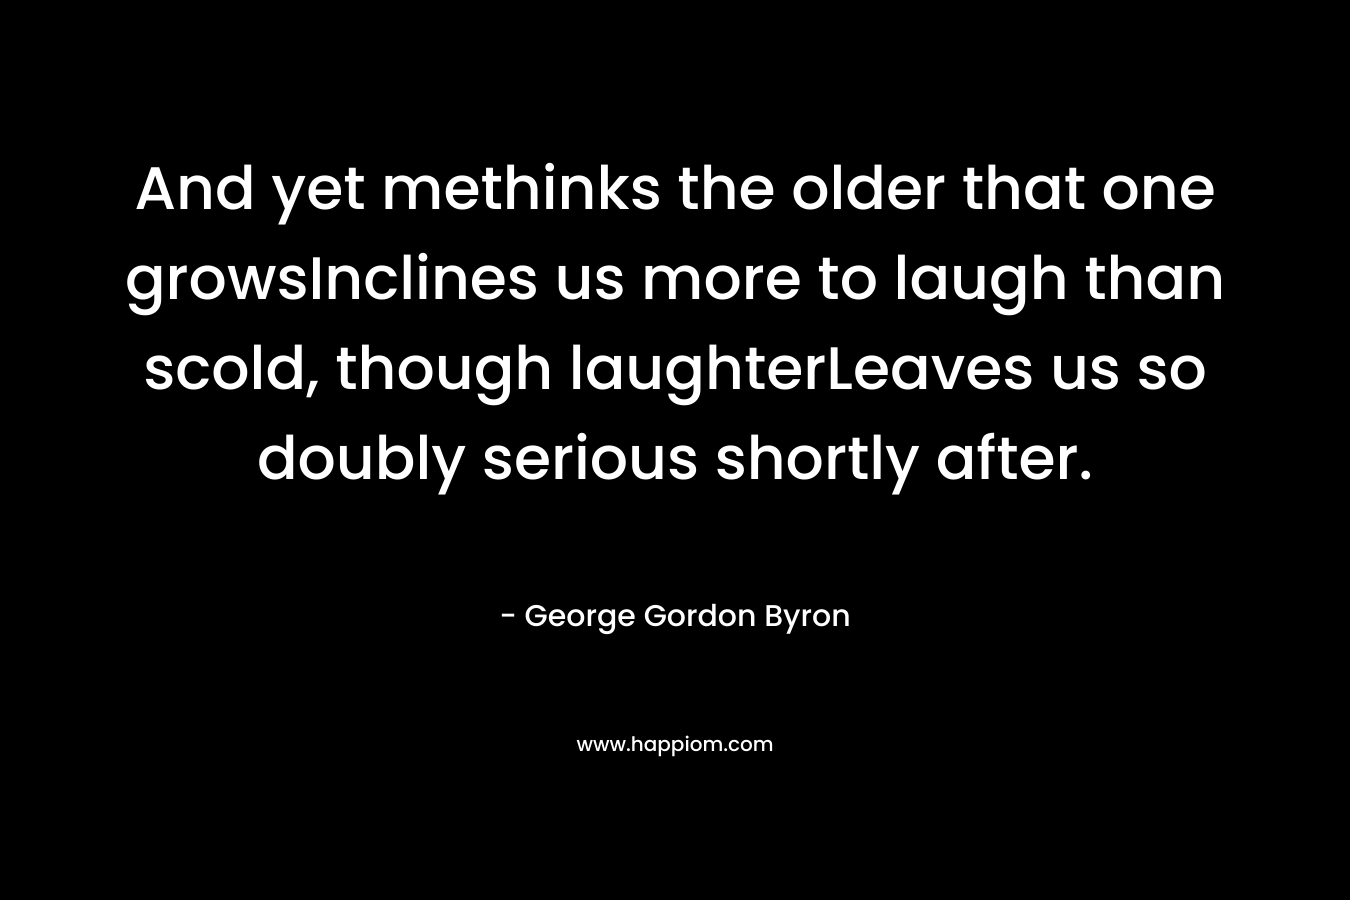 And yet methinks the older that one growsInclines us more to laugh than scold, though laughterLeaves us so doubly serious shortly after.